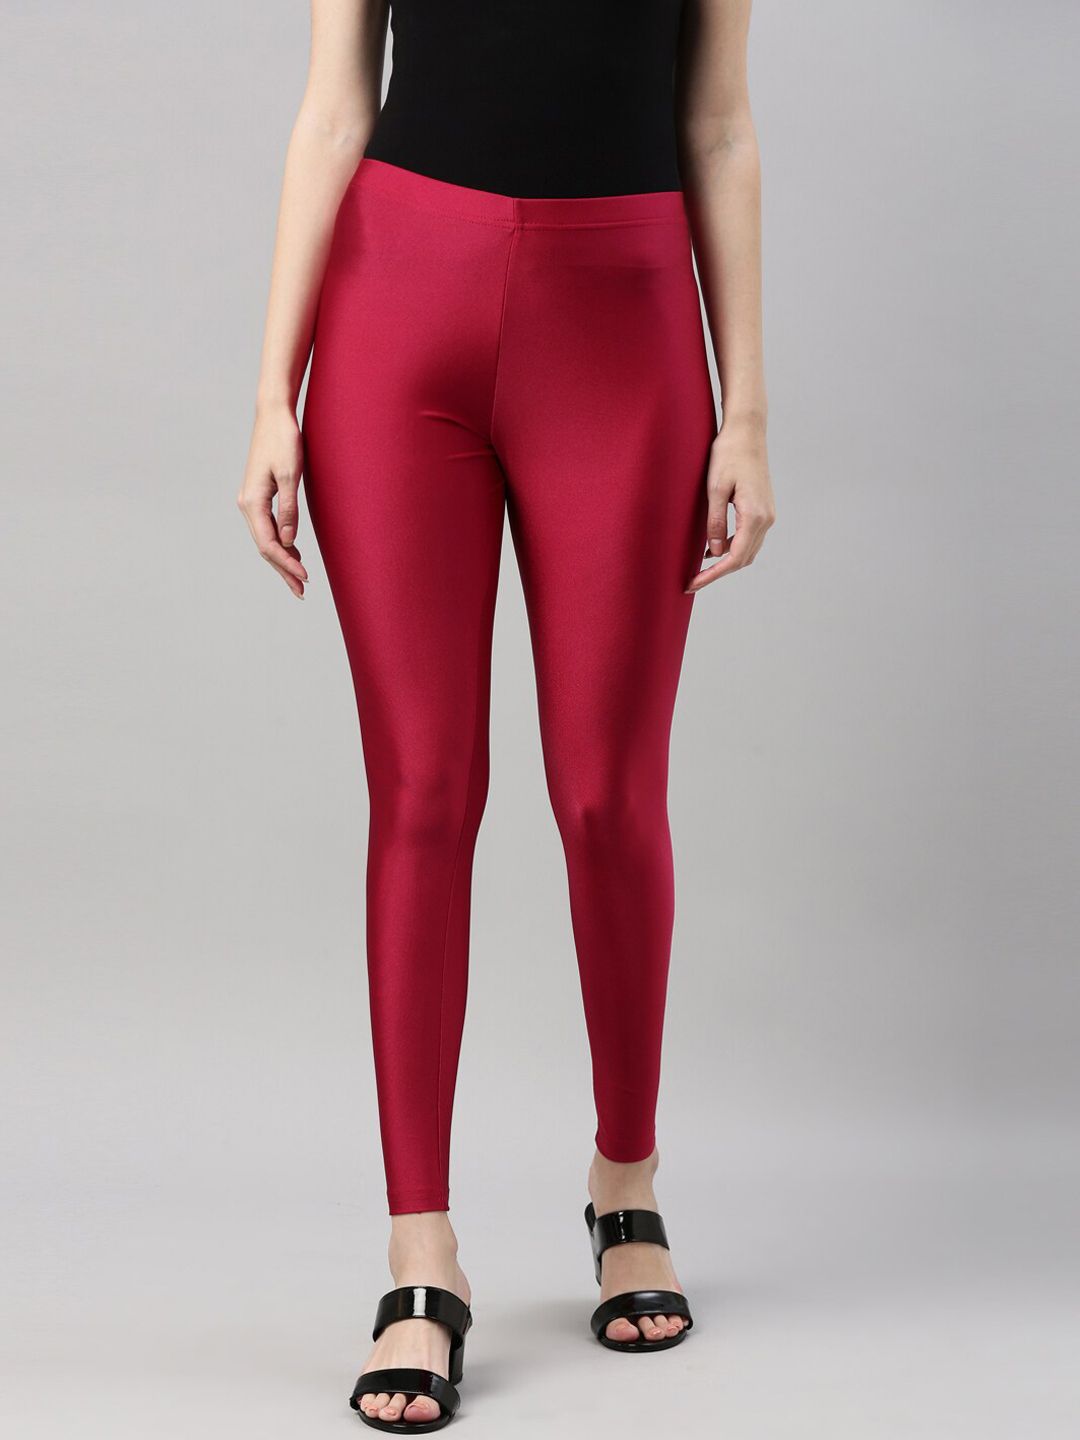 Go Colors Women Fuchsia Pink Solid Ankle-Length Leggings Price in India